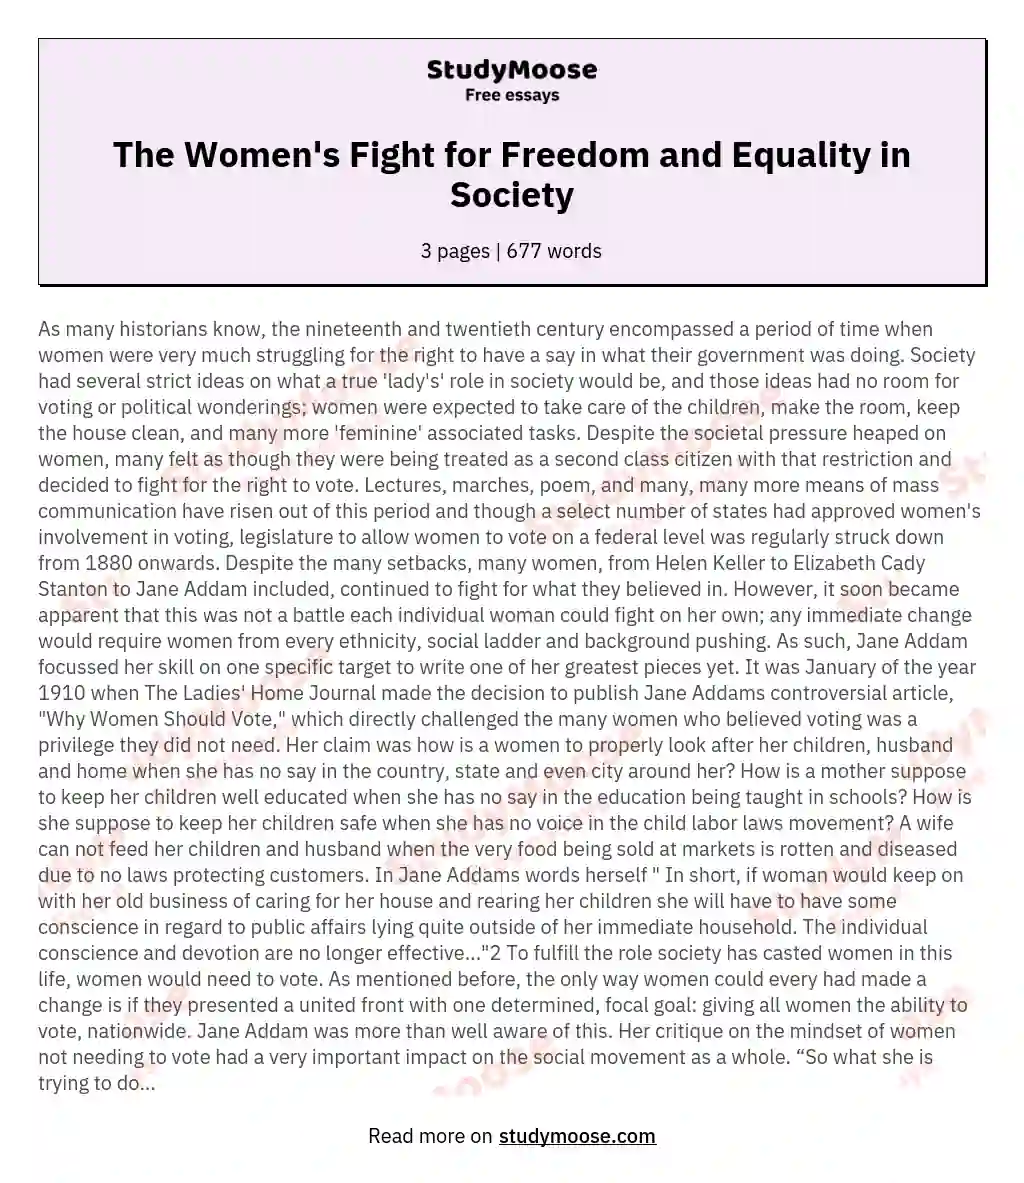 The Women's Fight for Freedom and Equality in Society essay